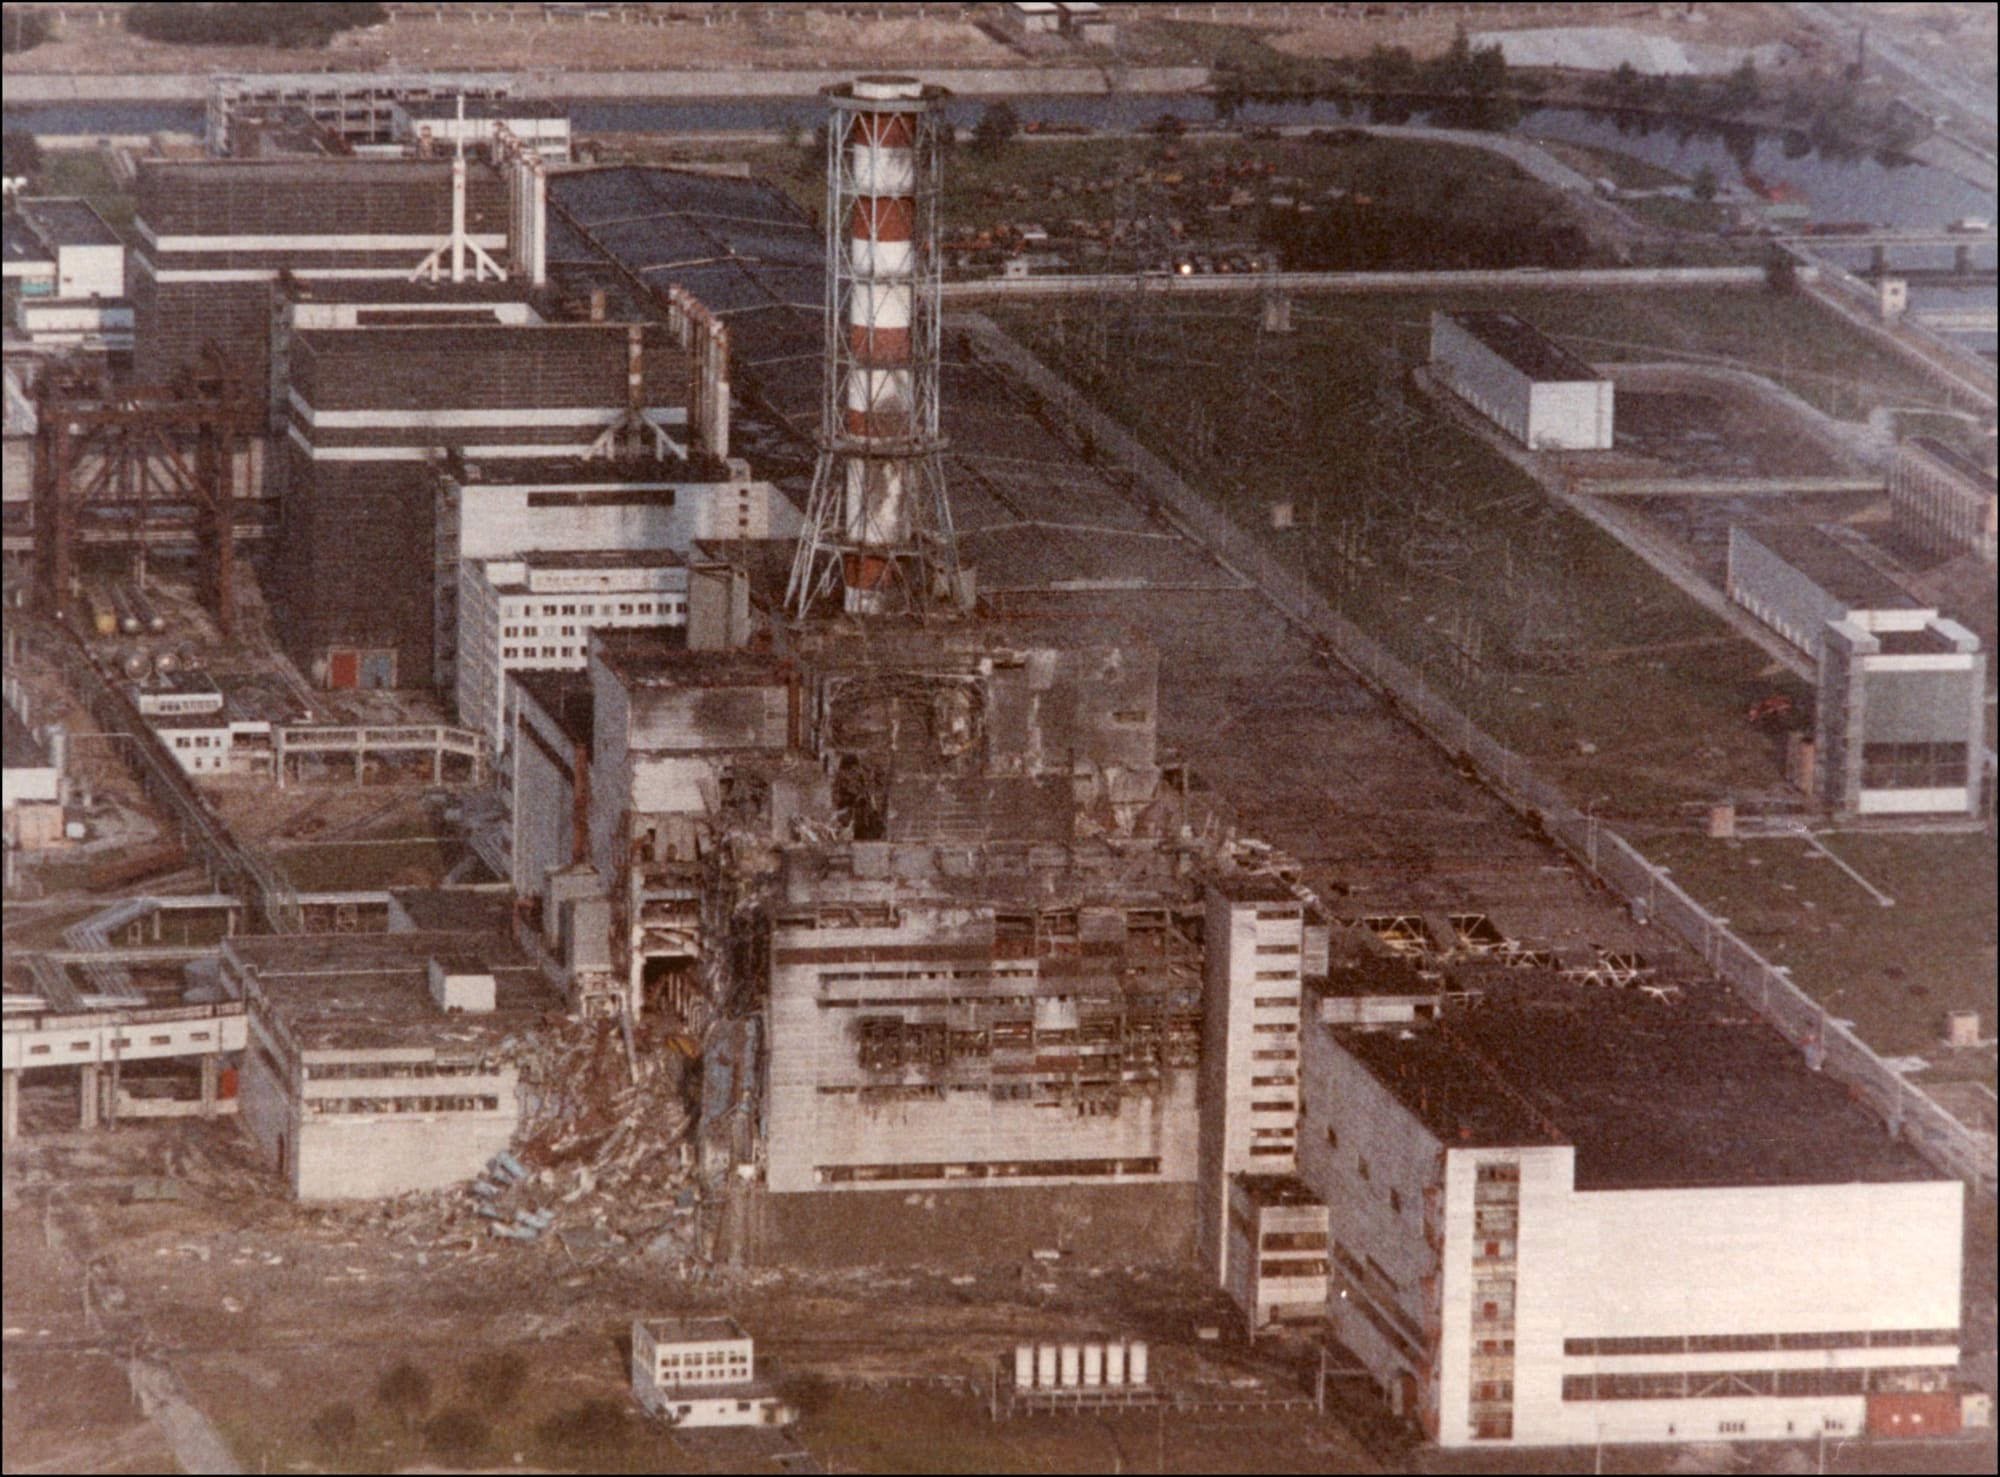 chernobyl pictures aftermath